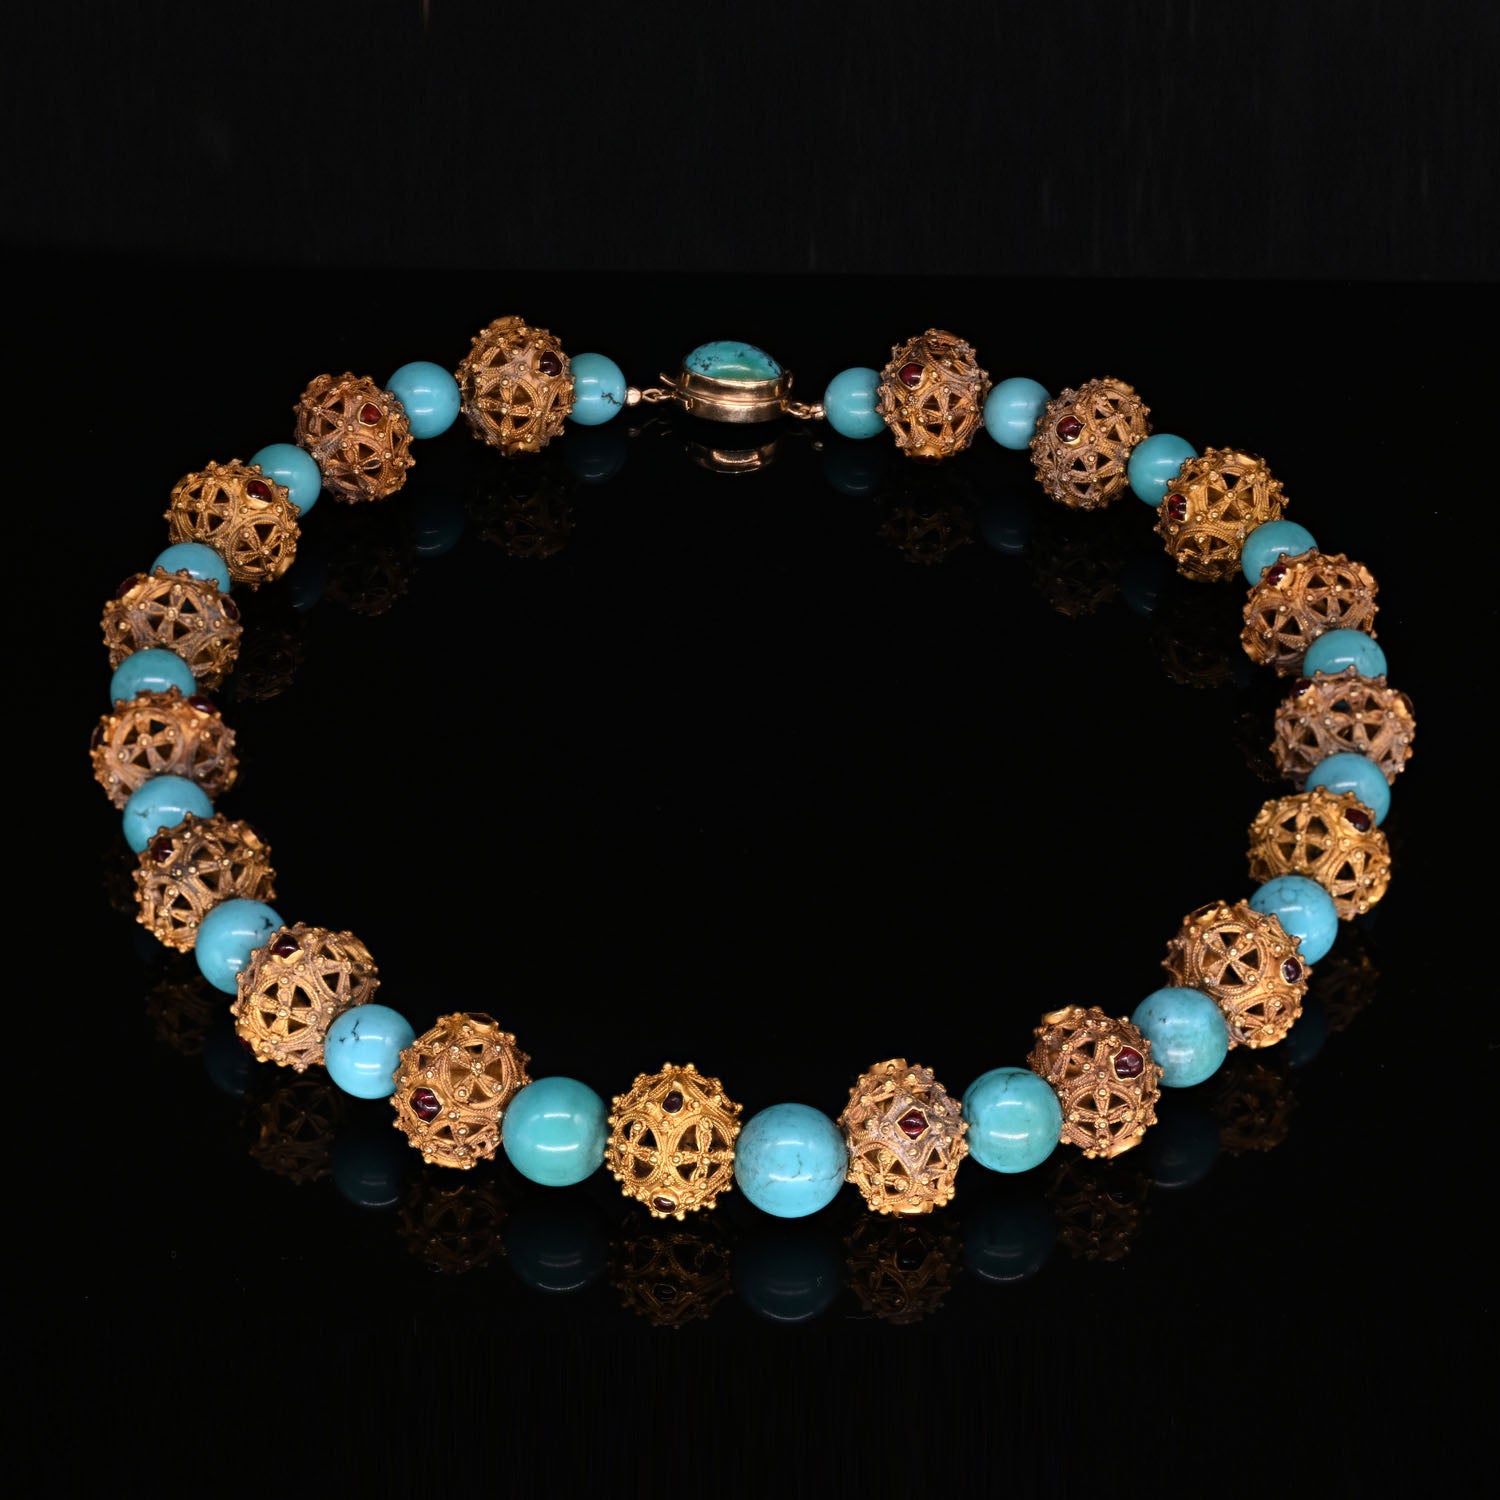 An Islamic Gold, Garnet, and Turquoise Bead Necklace, Middle Islamic/Byzantine Period, ca. 8th - 9th century CE